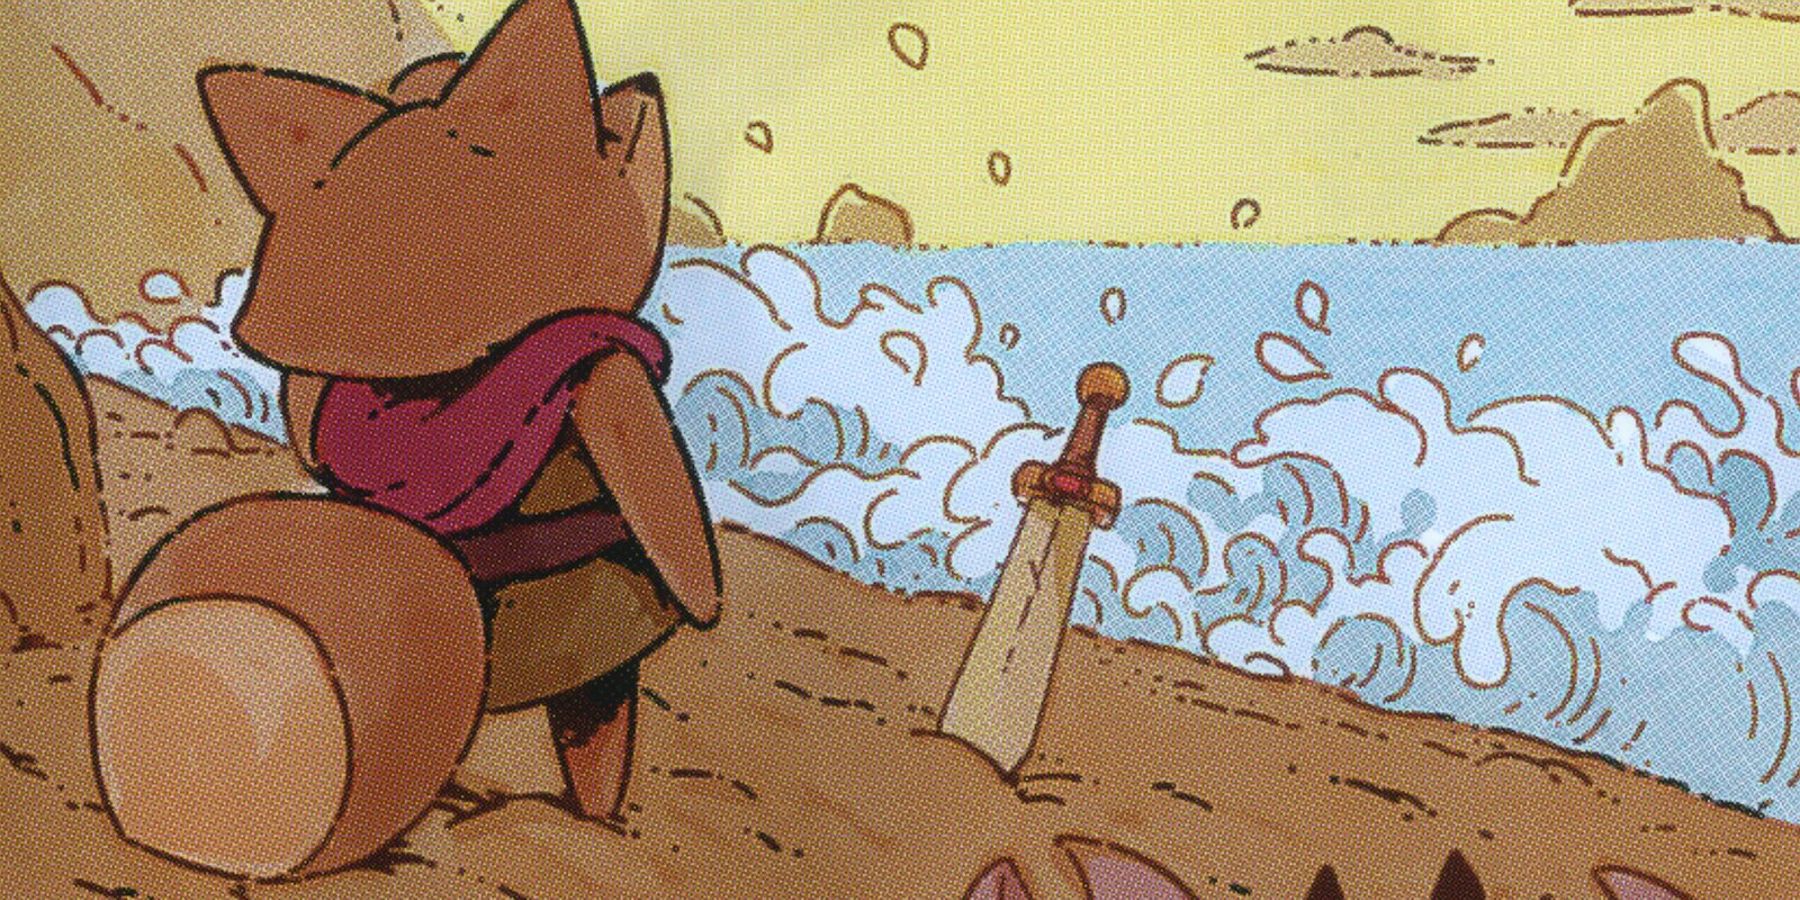 Tunic Game Manual Page Sword in Sand